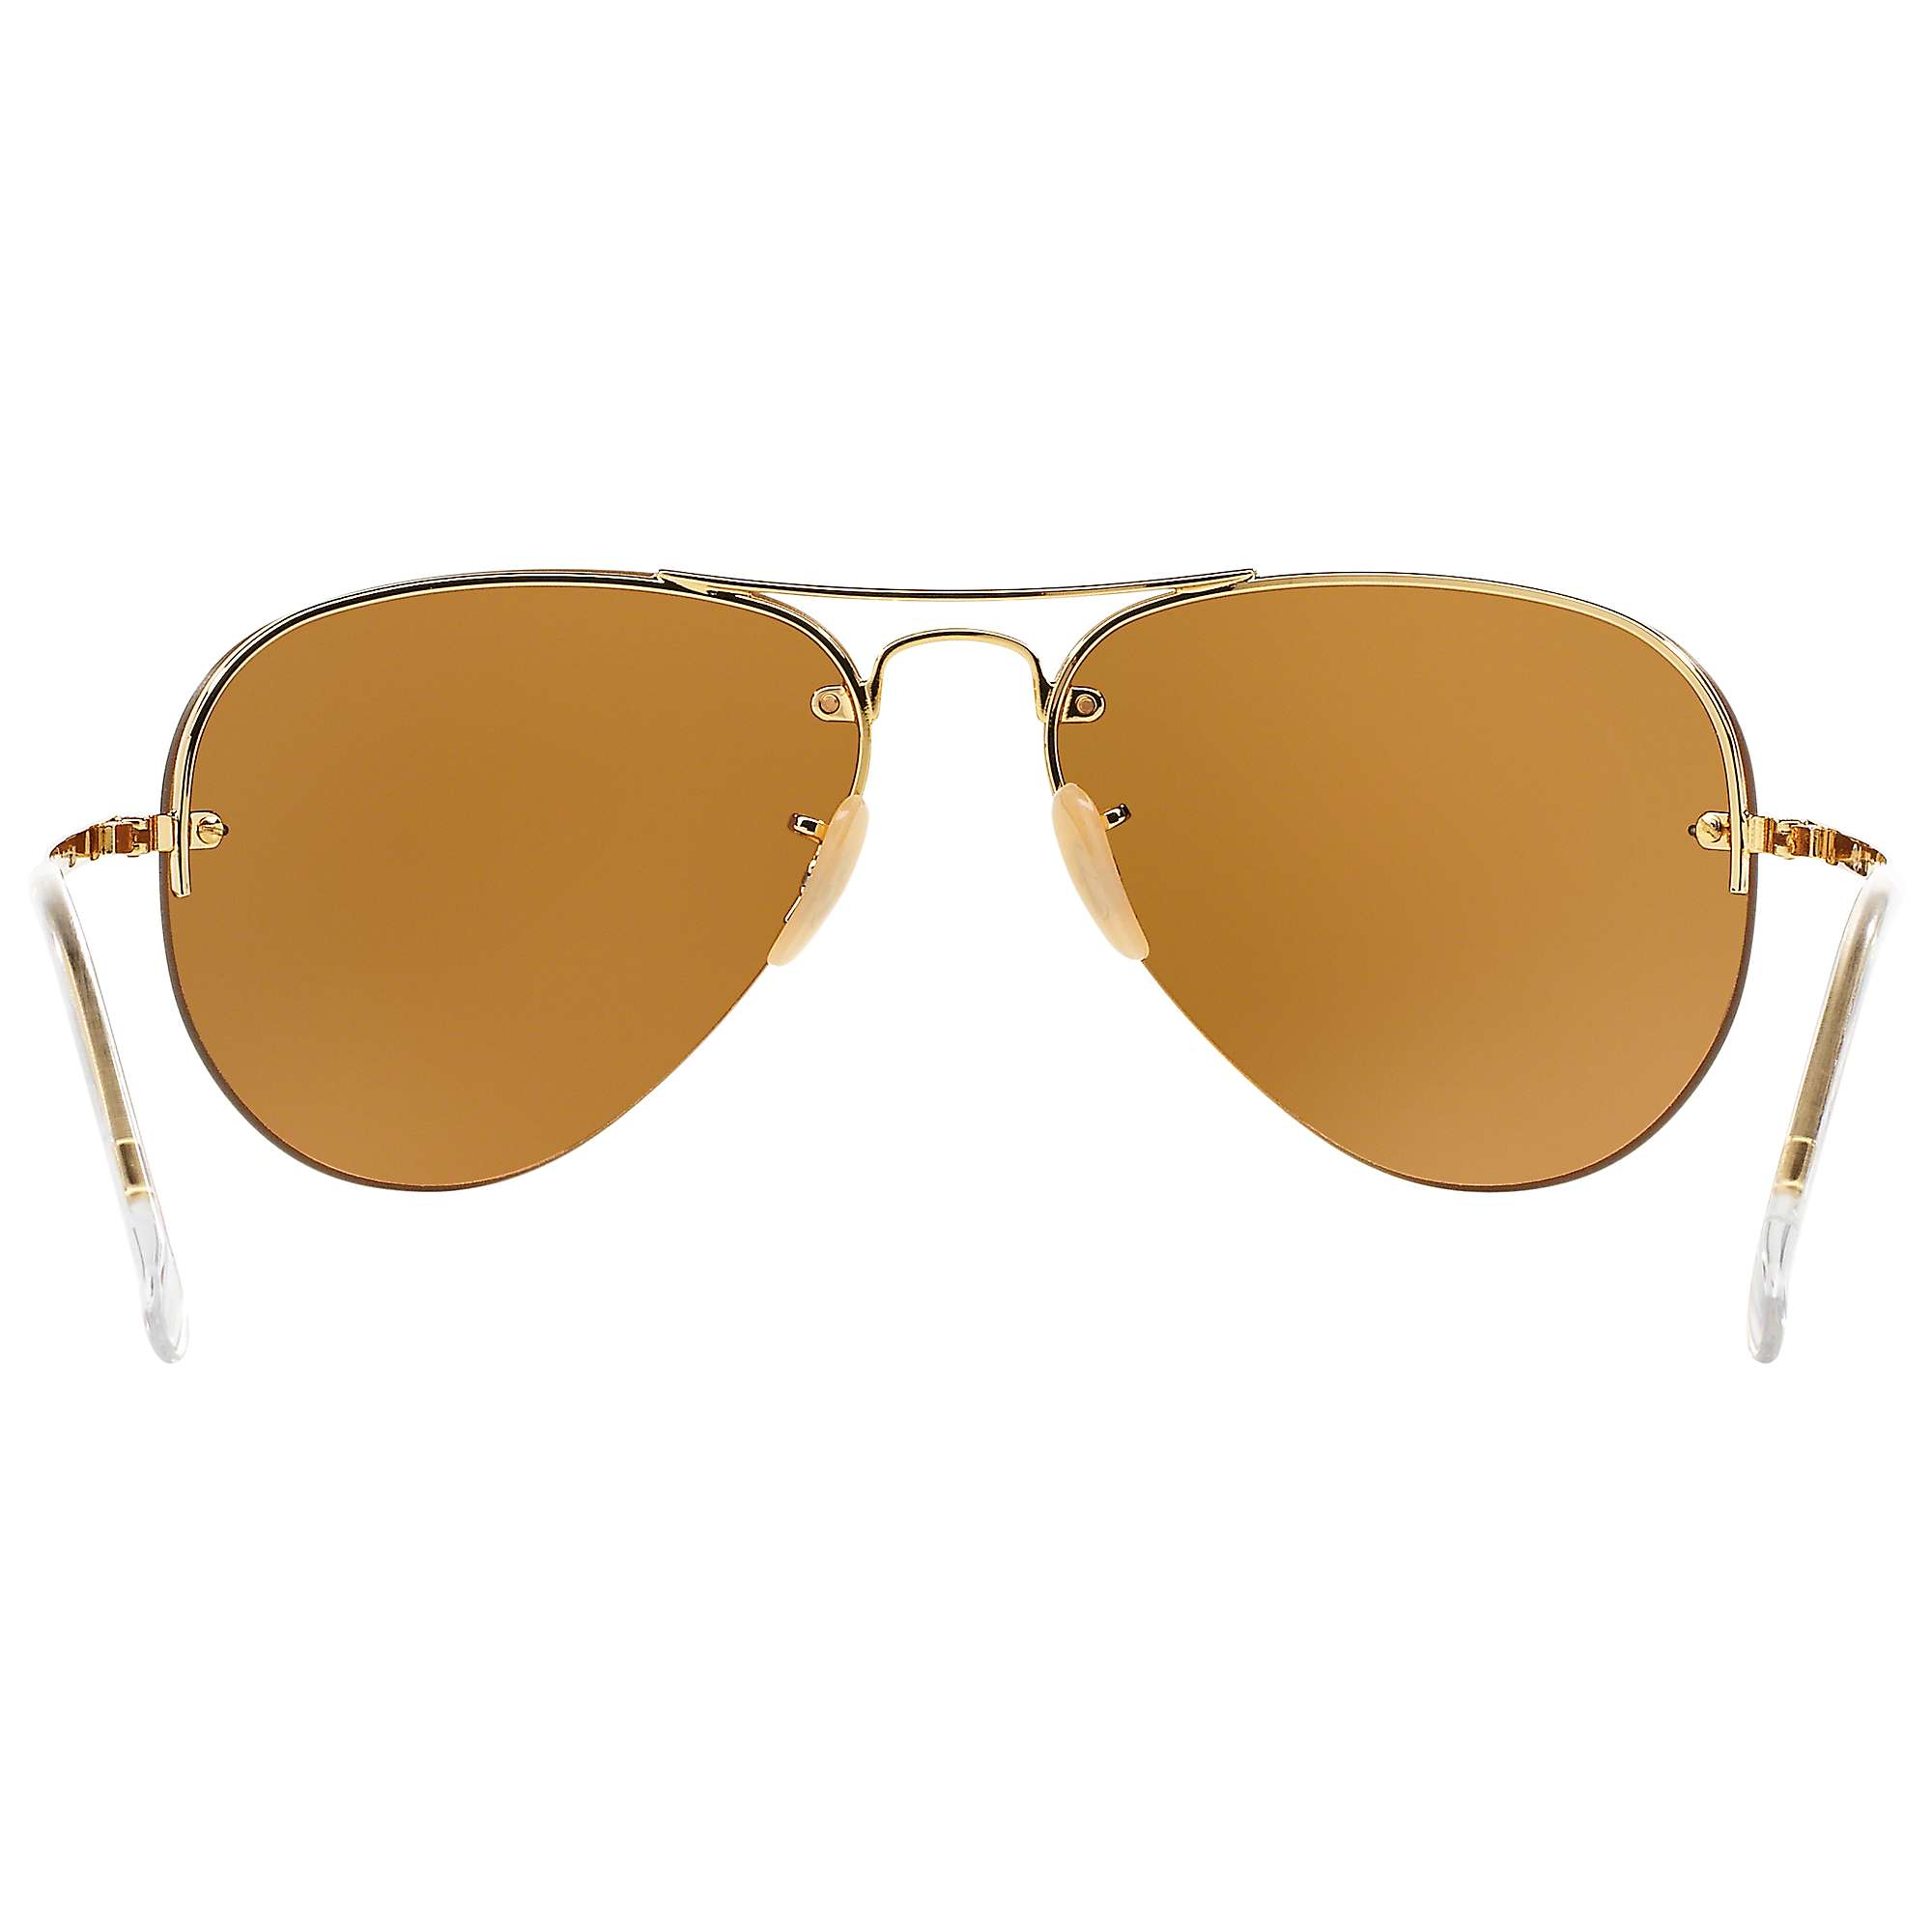 Buy Ray-Ban RB3449 Aviator Sunglasses Online at johnlewis.com